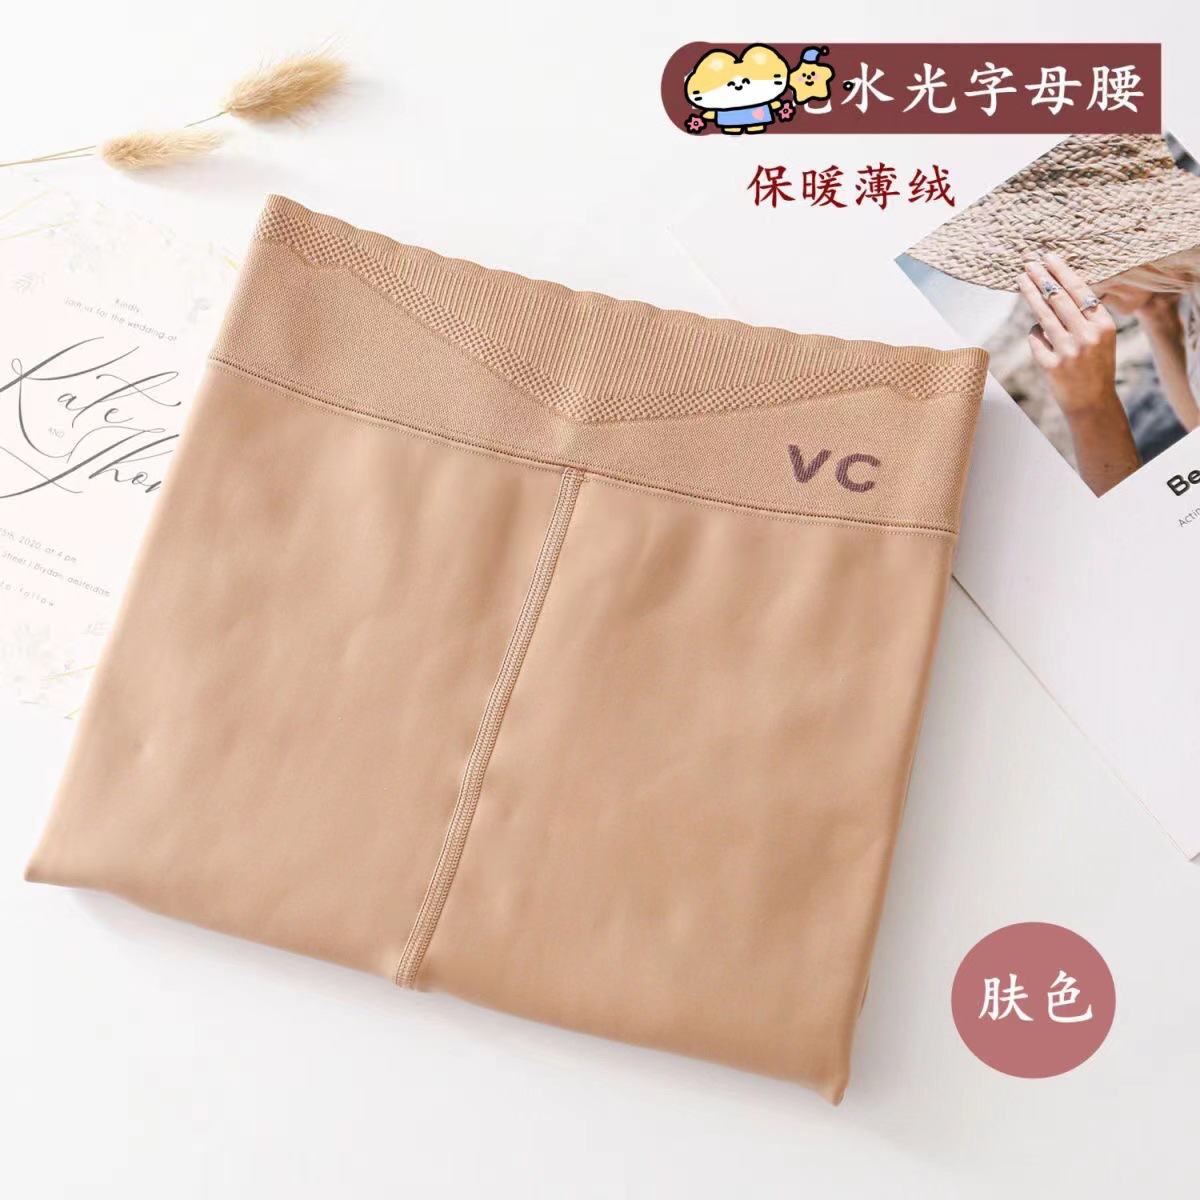 Autumn and Winter VC Water Light Pants Superb Fleshcolor Pantynose Naked Women Natural Leg Shaping One-Piece Trousers Thickened Fleece Lined Leggings